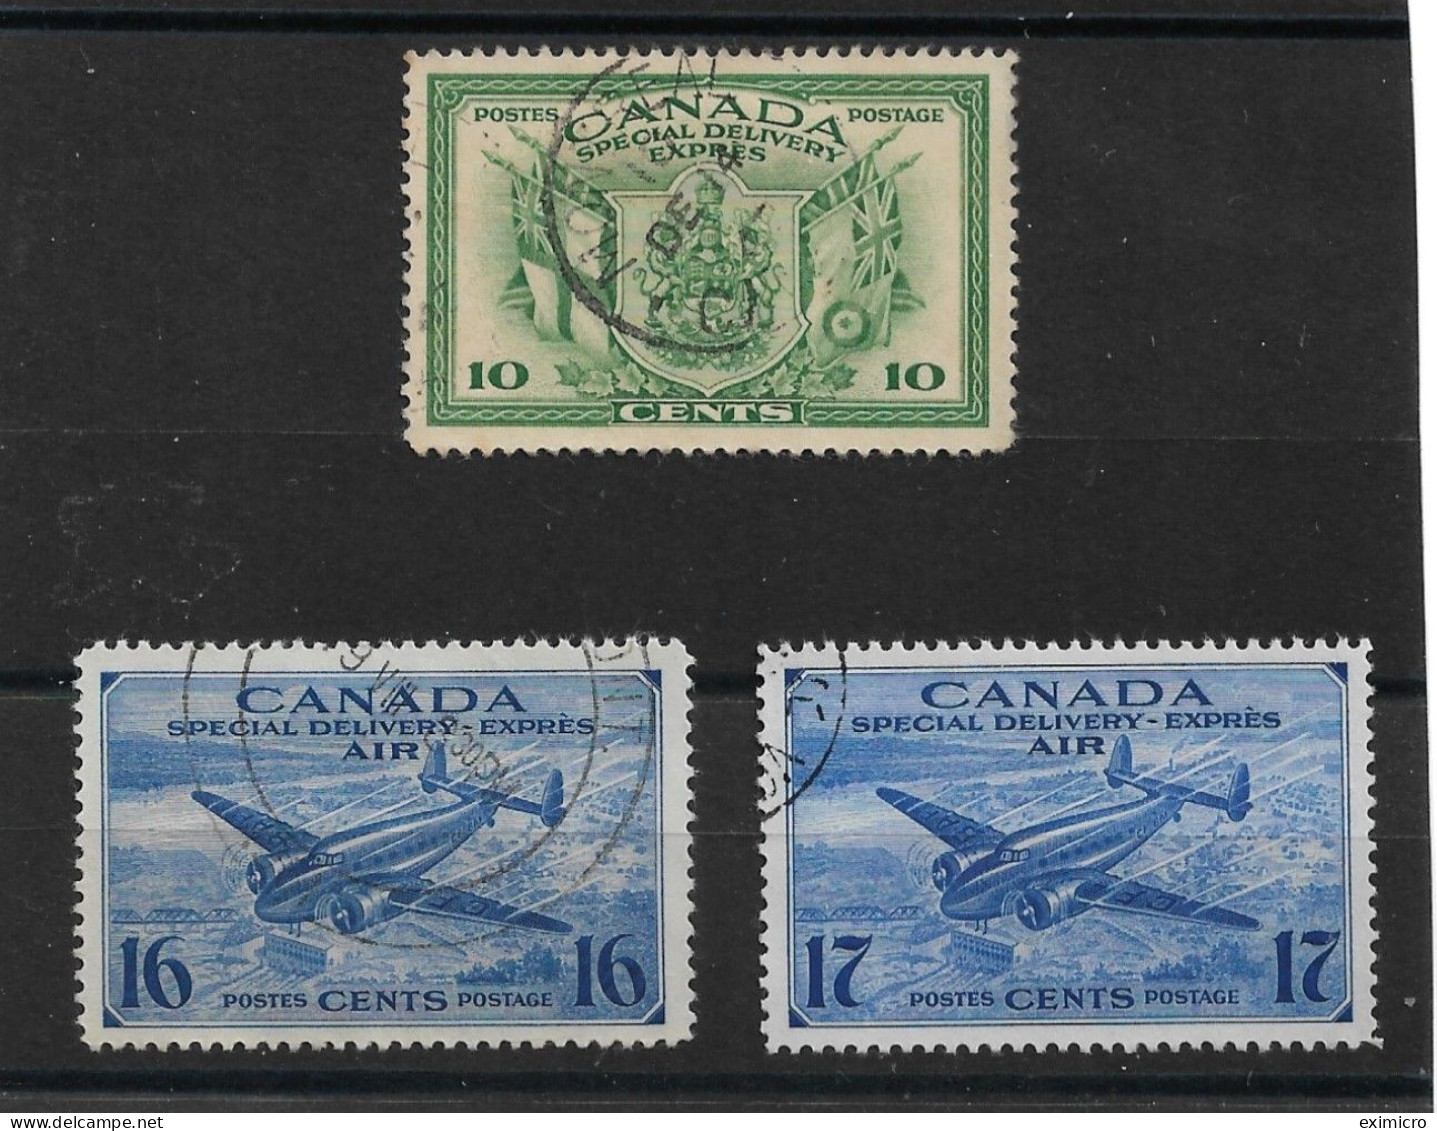 CANADA 1942 - 1943 WAR EFFORT SPECIAL DELIVERY SET SG S12/S14 FINE USED Cat £9 - Correo Urgente